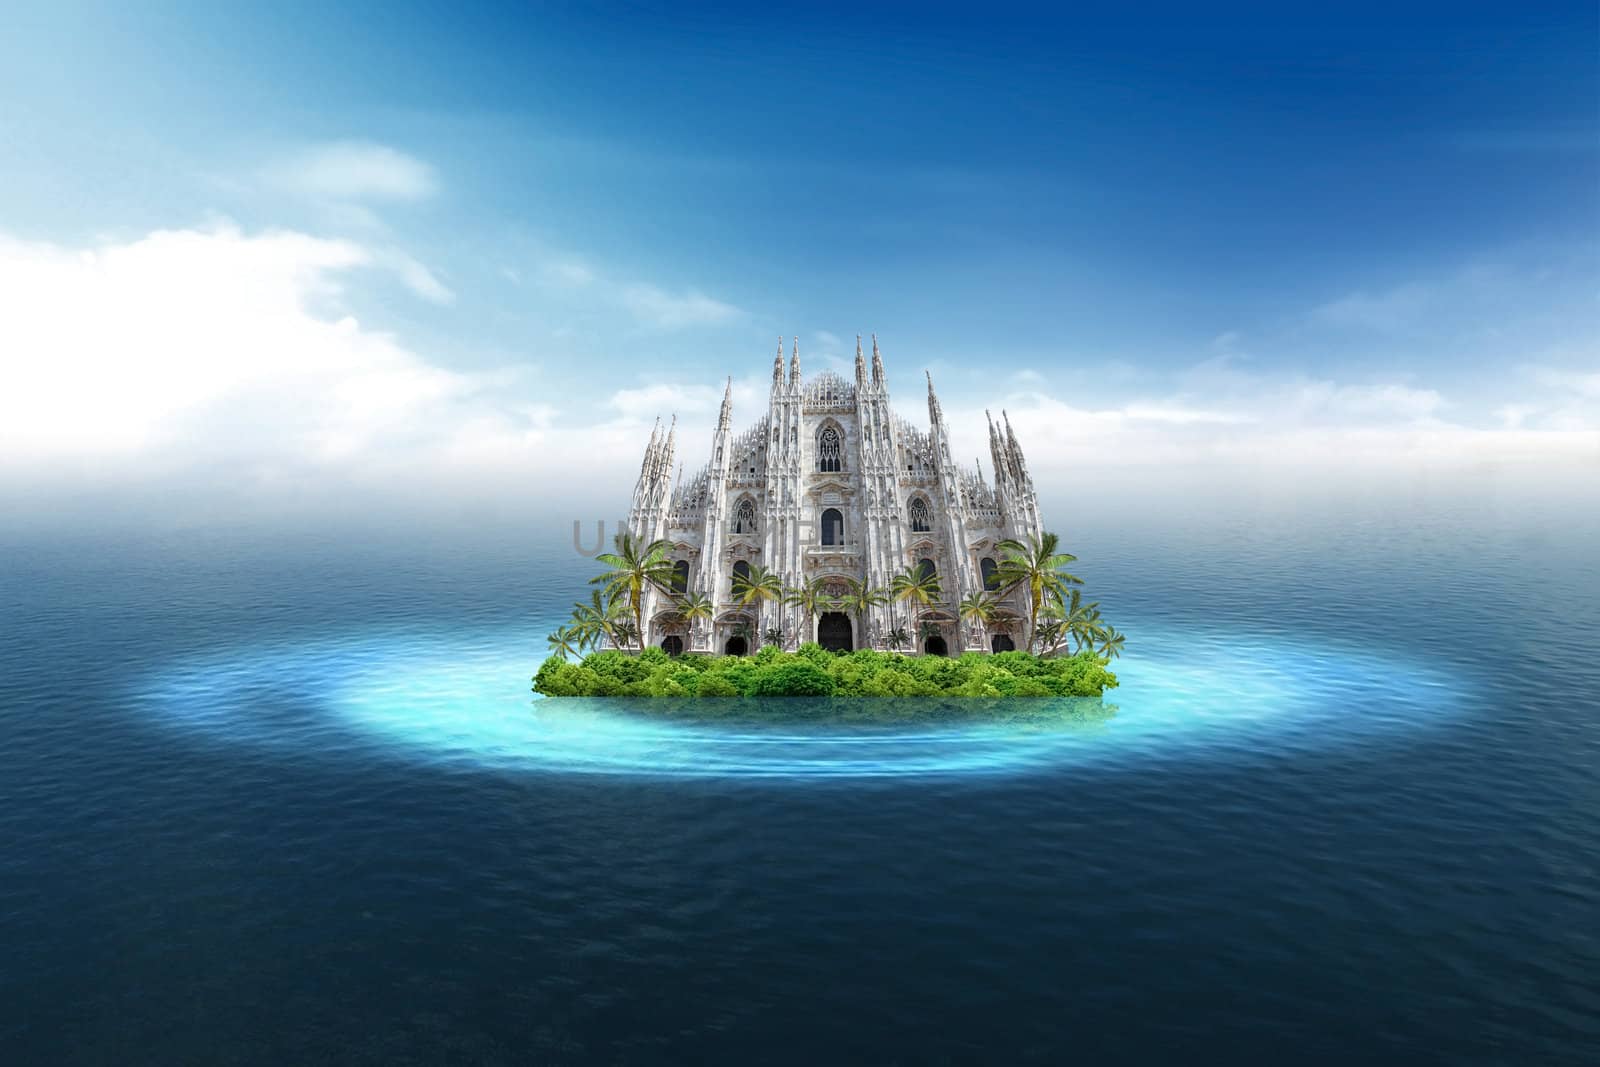 Milan Cathedral,Duomo, on the tropical island in the middle of the ocean